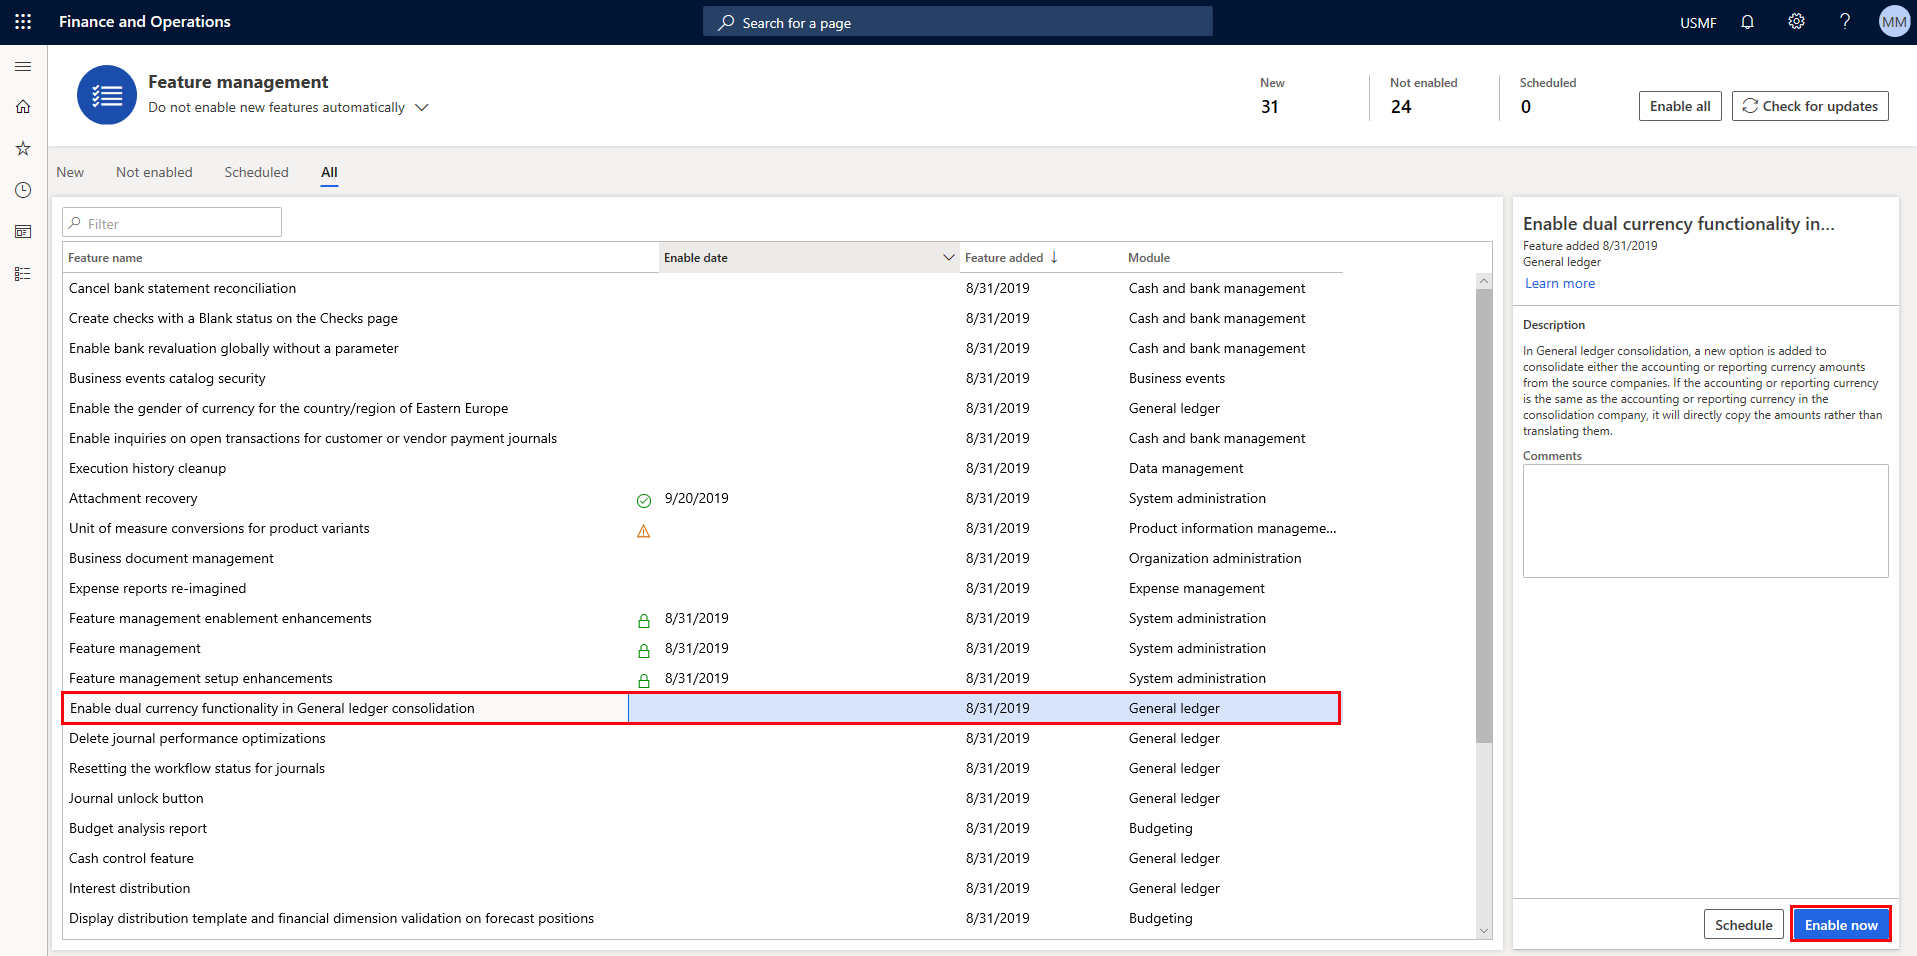 Screenshot of the Feature management  workspace highlighting Enable dual currency functionality in General ledger consolidation.